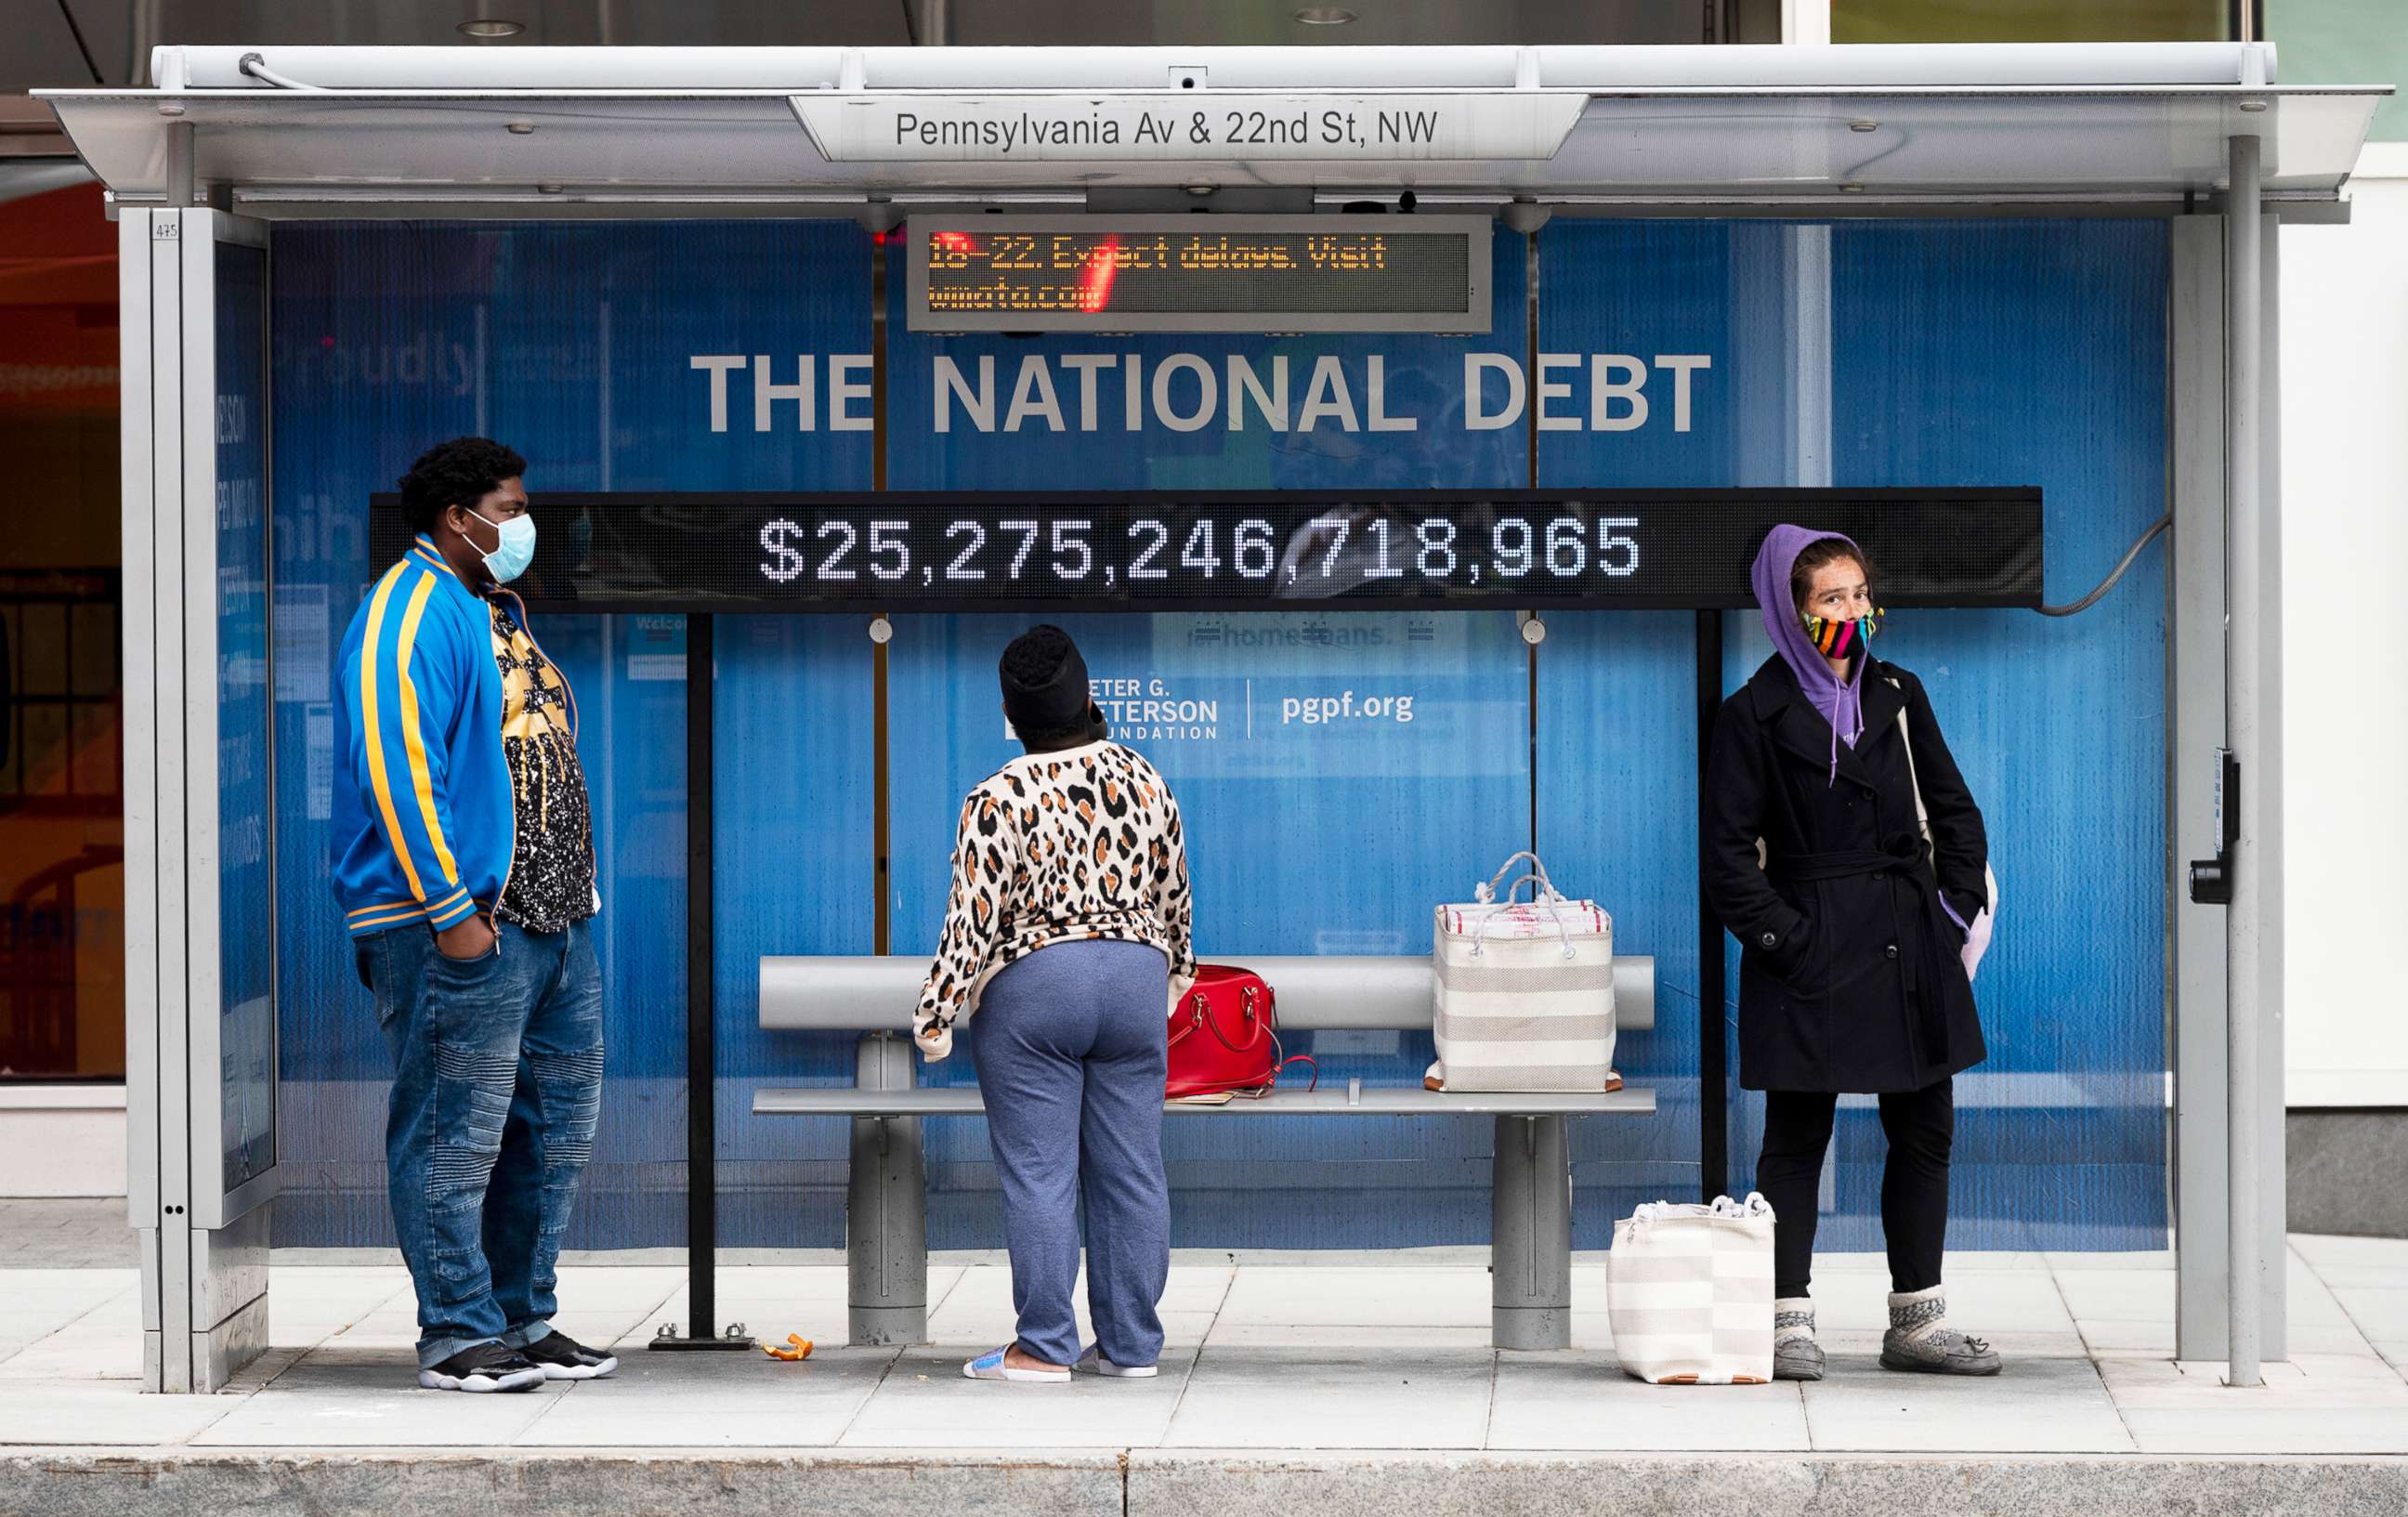 PHOTO: Passengers wearing face masks wait for their bus in front of a national debt display on Pennsylvania Ave. NW in Washington, May 18, 2020. 